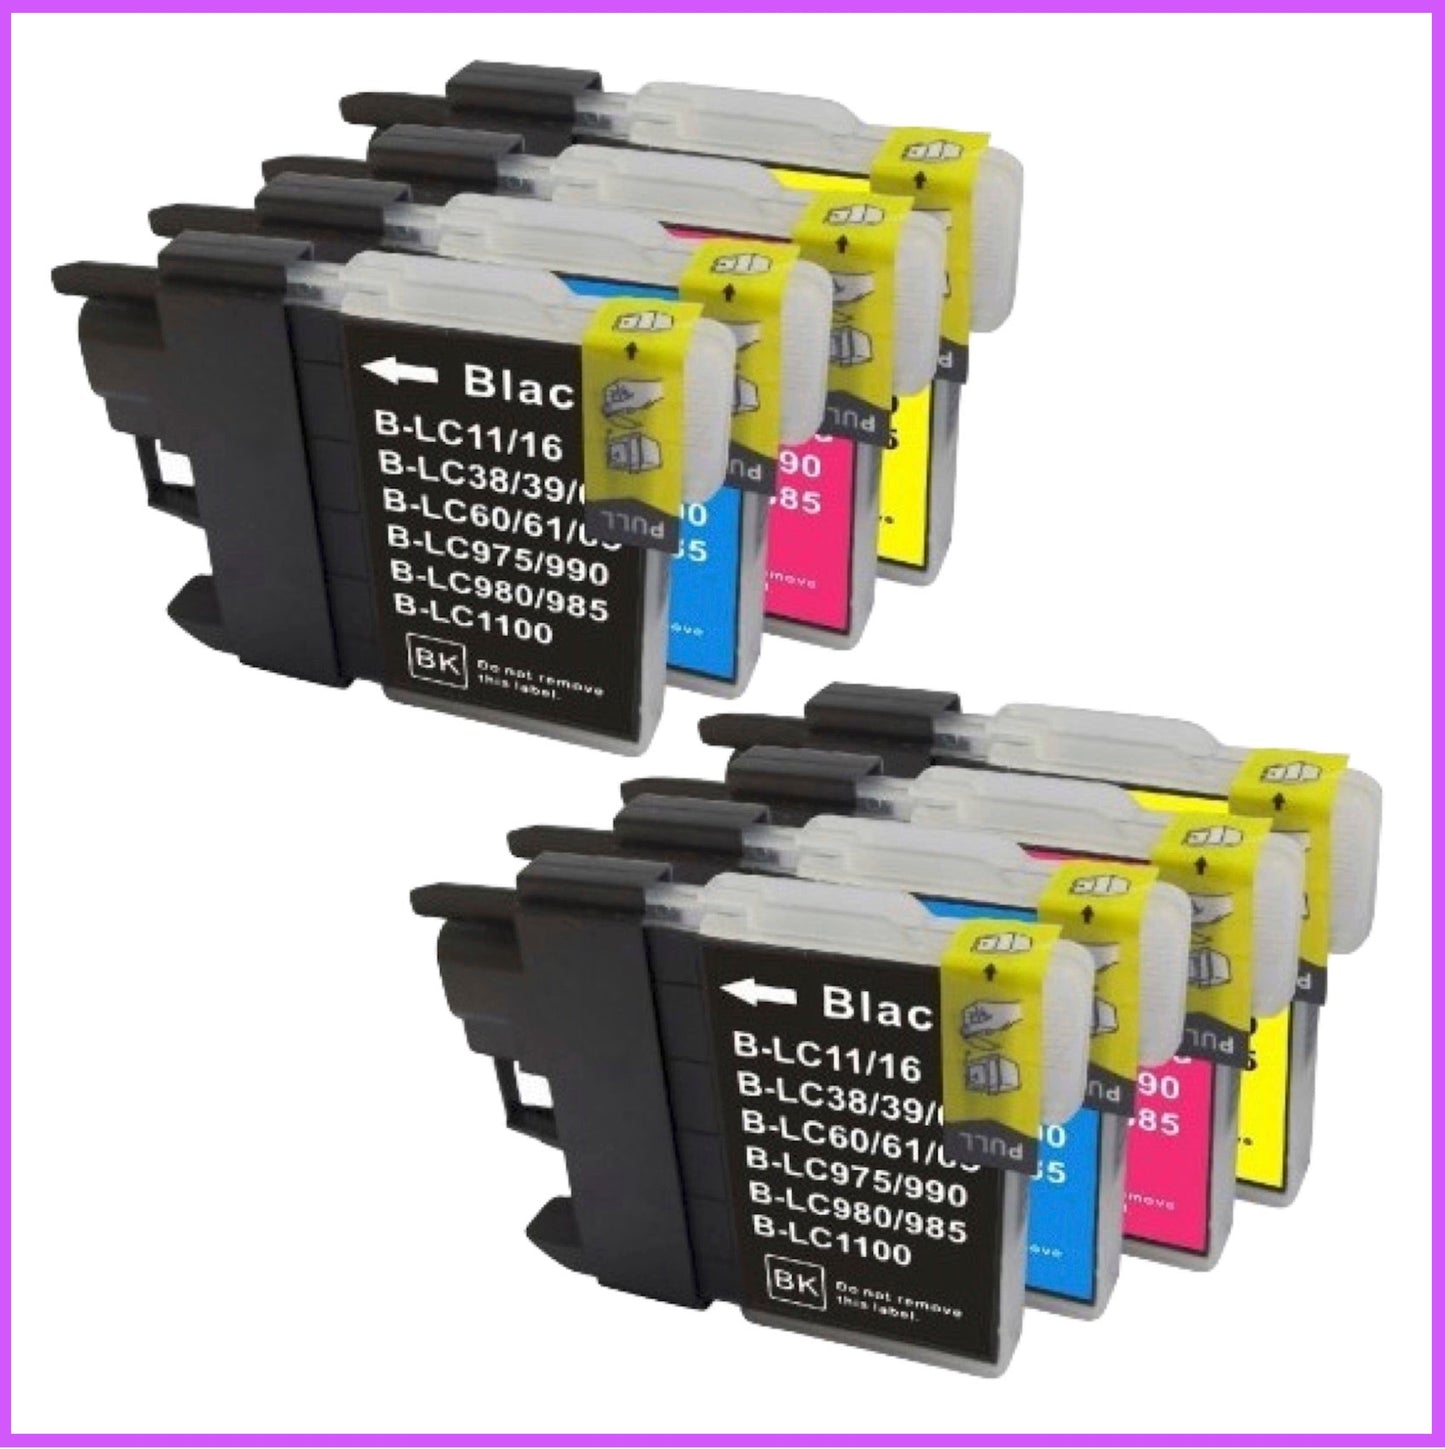 Compatible Brother 985XL Multipack x2 Ink Cartridges BK/C/M/Y (Earth)